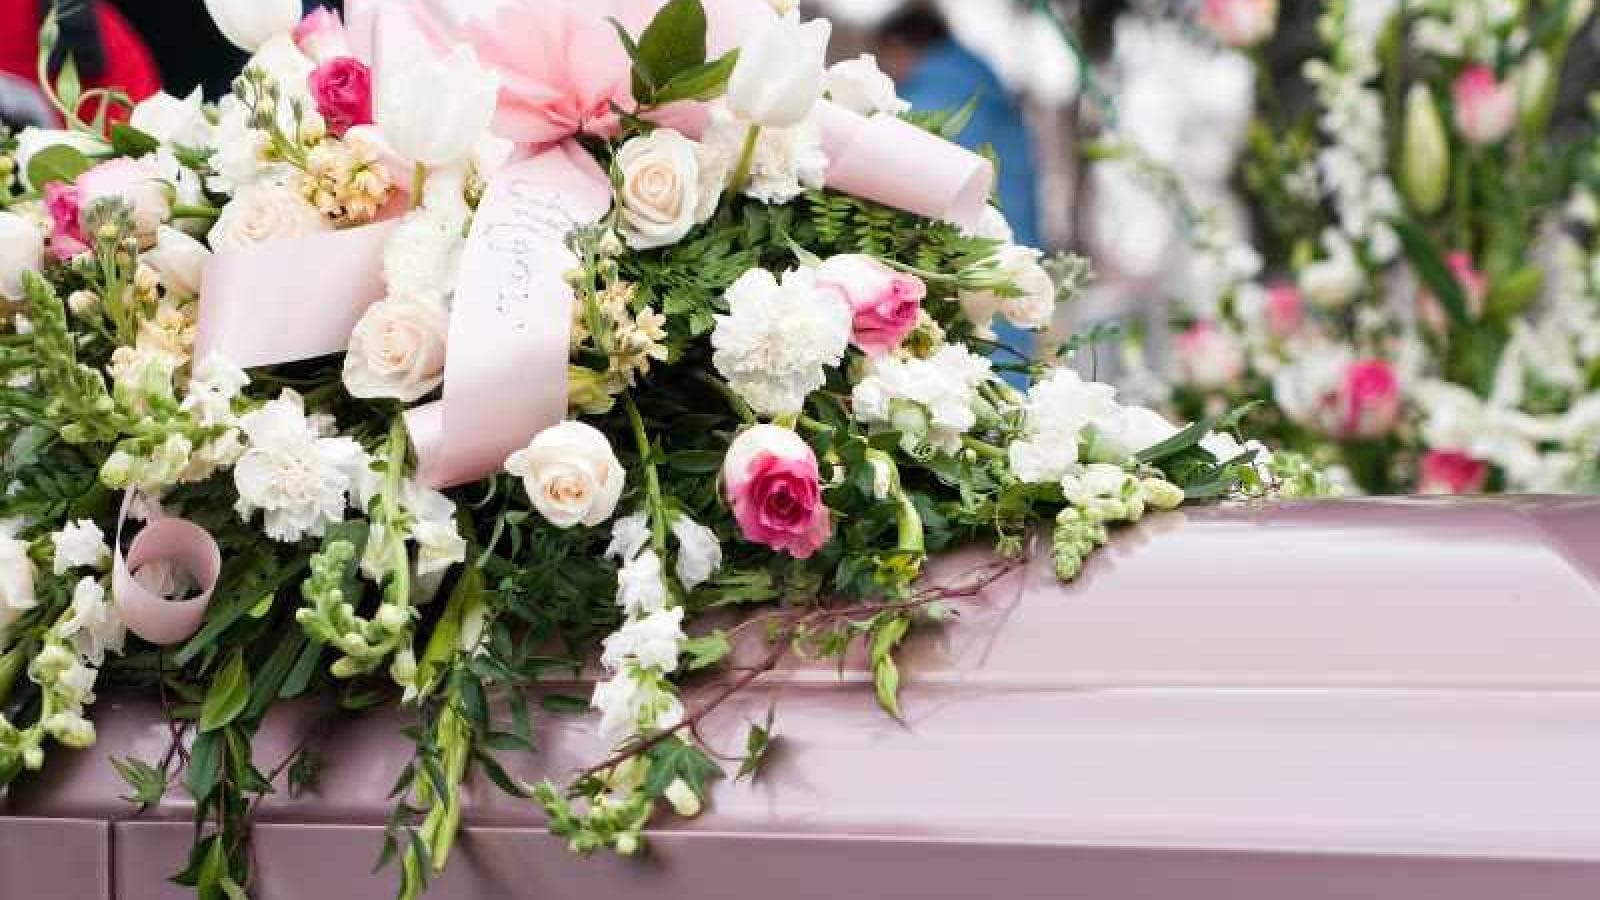 A floral arrangement sits on top of a coffin.